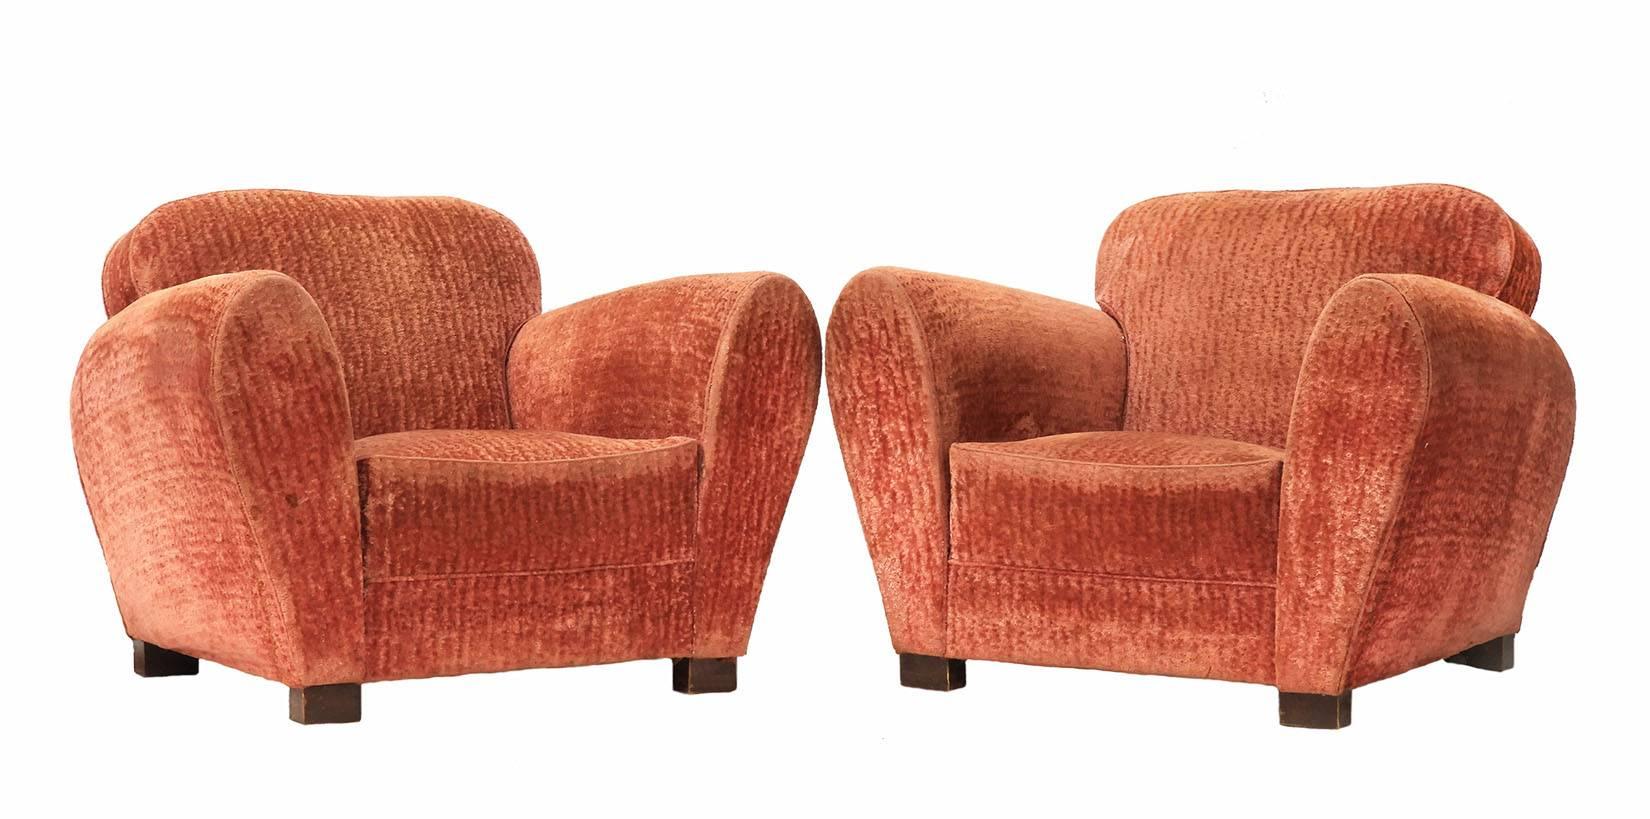 Pair of art deco club chairs French original armchairs
Very good original condition 
Upholstery sound covers easily changed to suit your interior, if you would like an estimate to do this before shipping please ask.
 